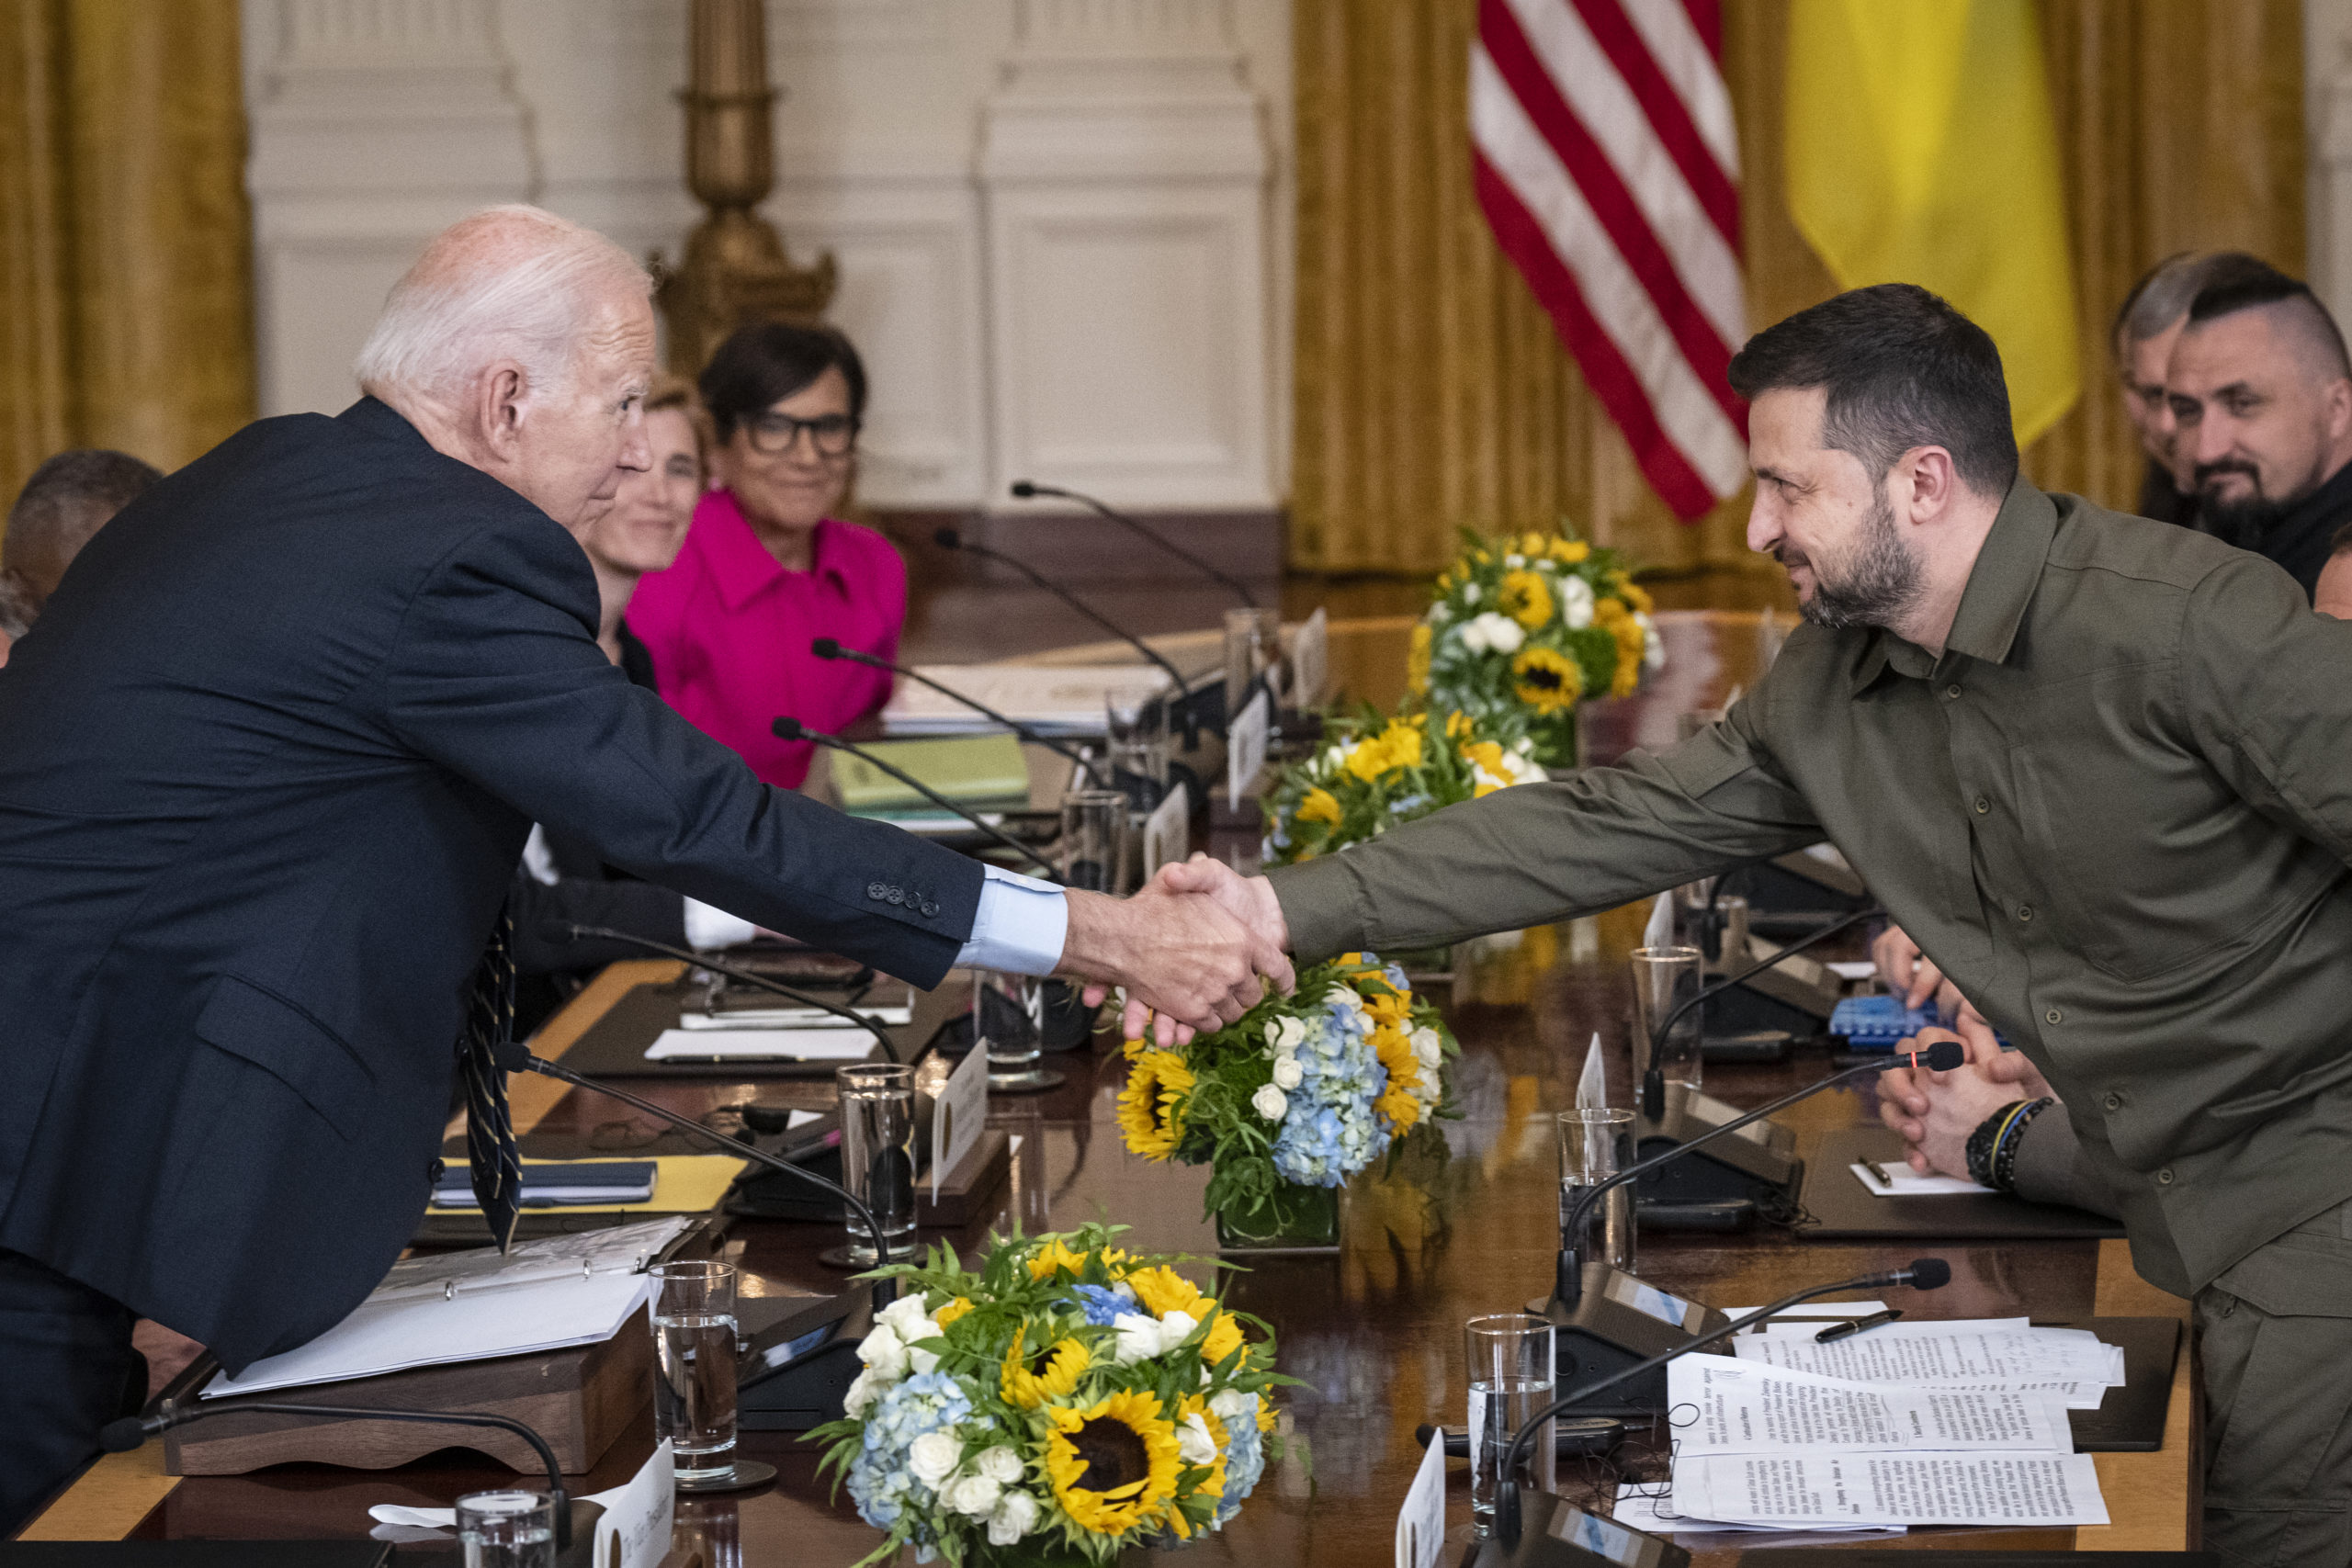 U.S. President Joe Biden shakes hands with President of Ukraine Volodymyr Zelensky after a meeting in the East Room of the White House September 21, 2023 in Washington, DC. Zelensky is in the nation's capital to meet with President Biden and Congressional lawmakers after attending the United Nations General Assembly in New York. (Photo by Drew Angerer/Getty Images)